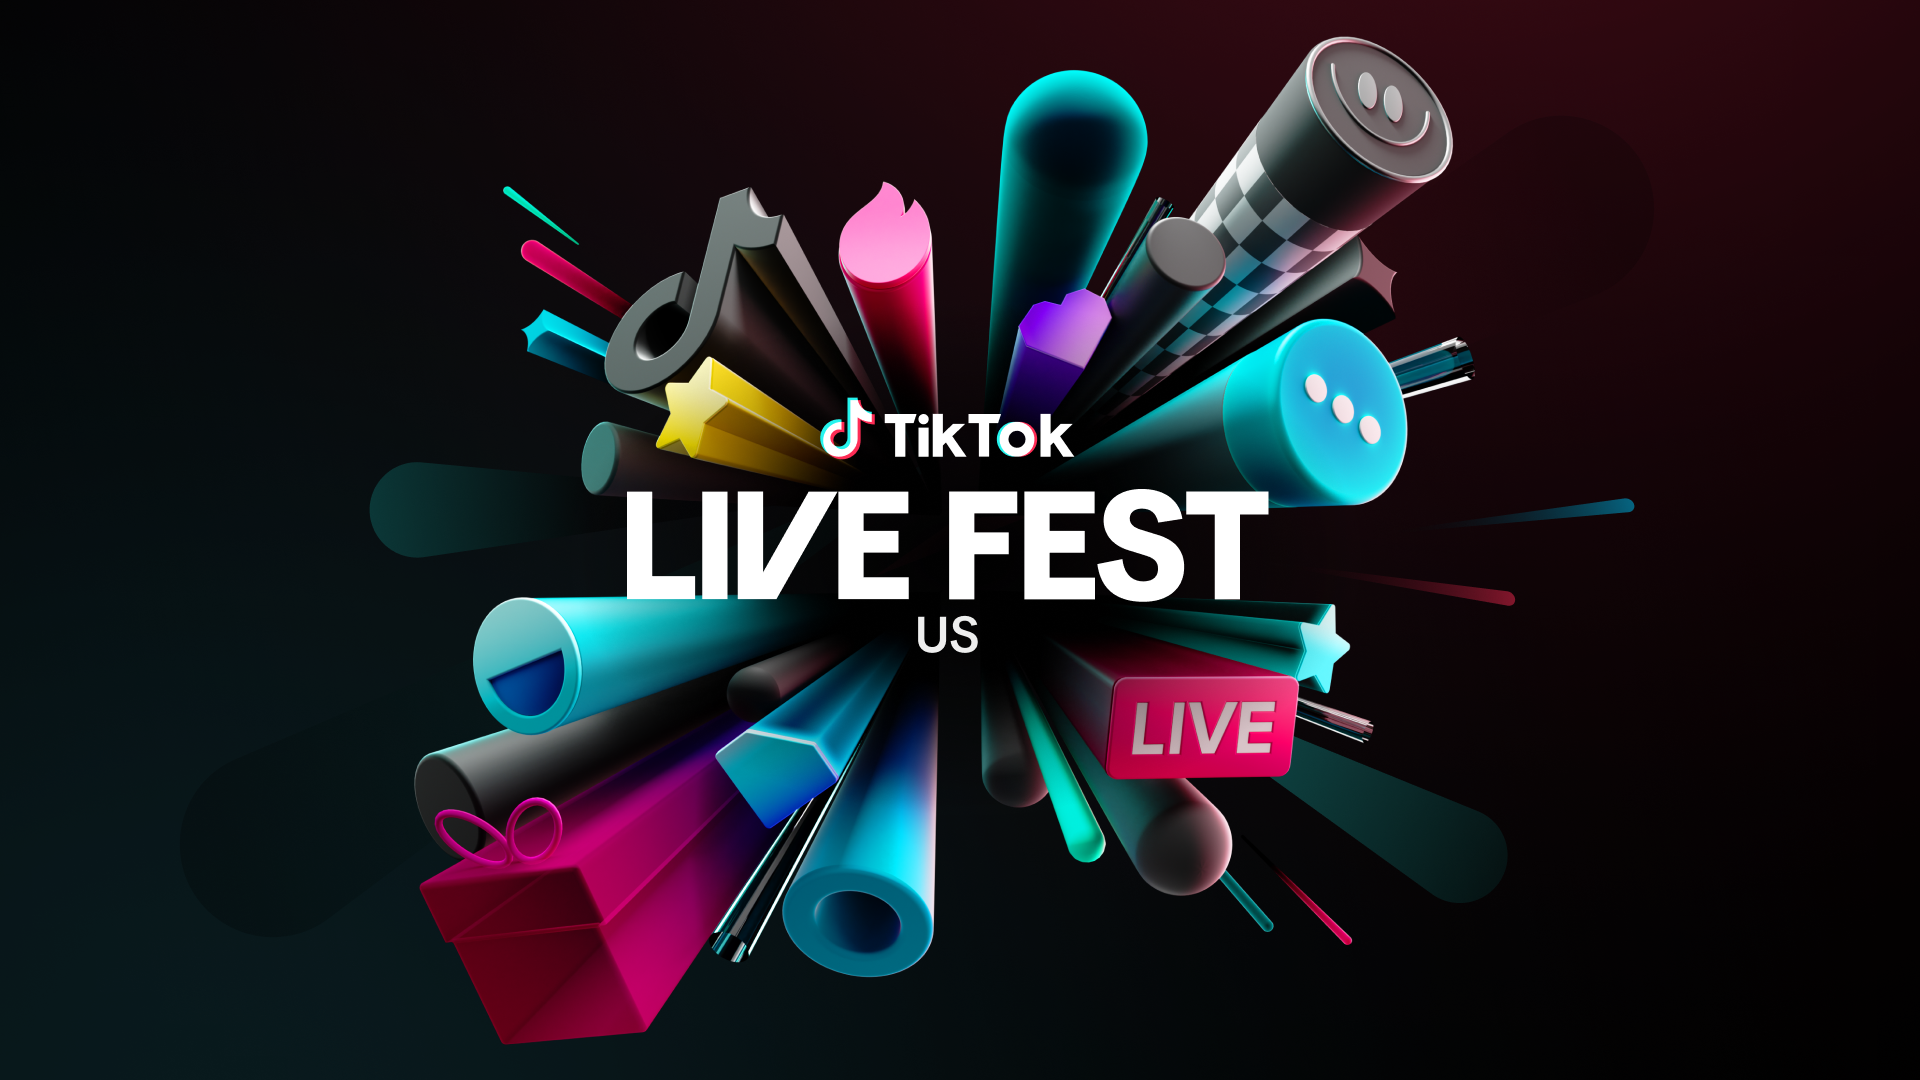 How Much Are TikTok Gift Points Worth?